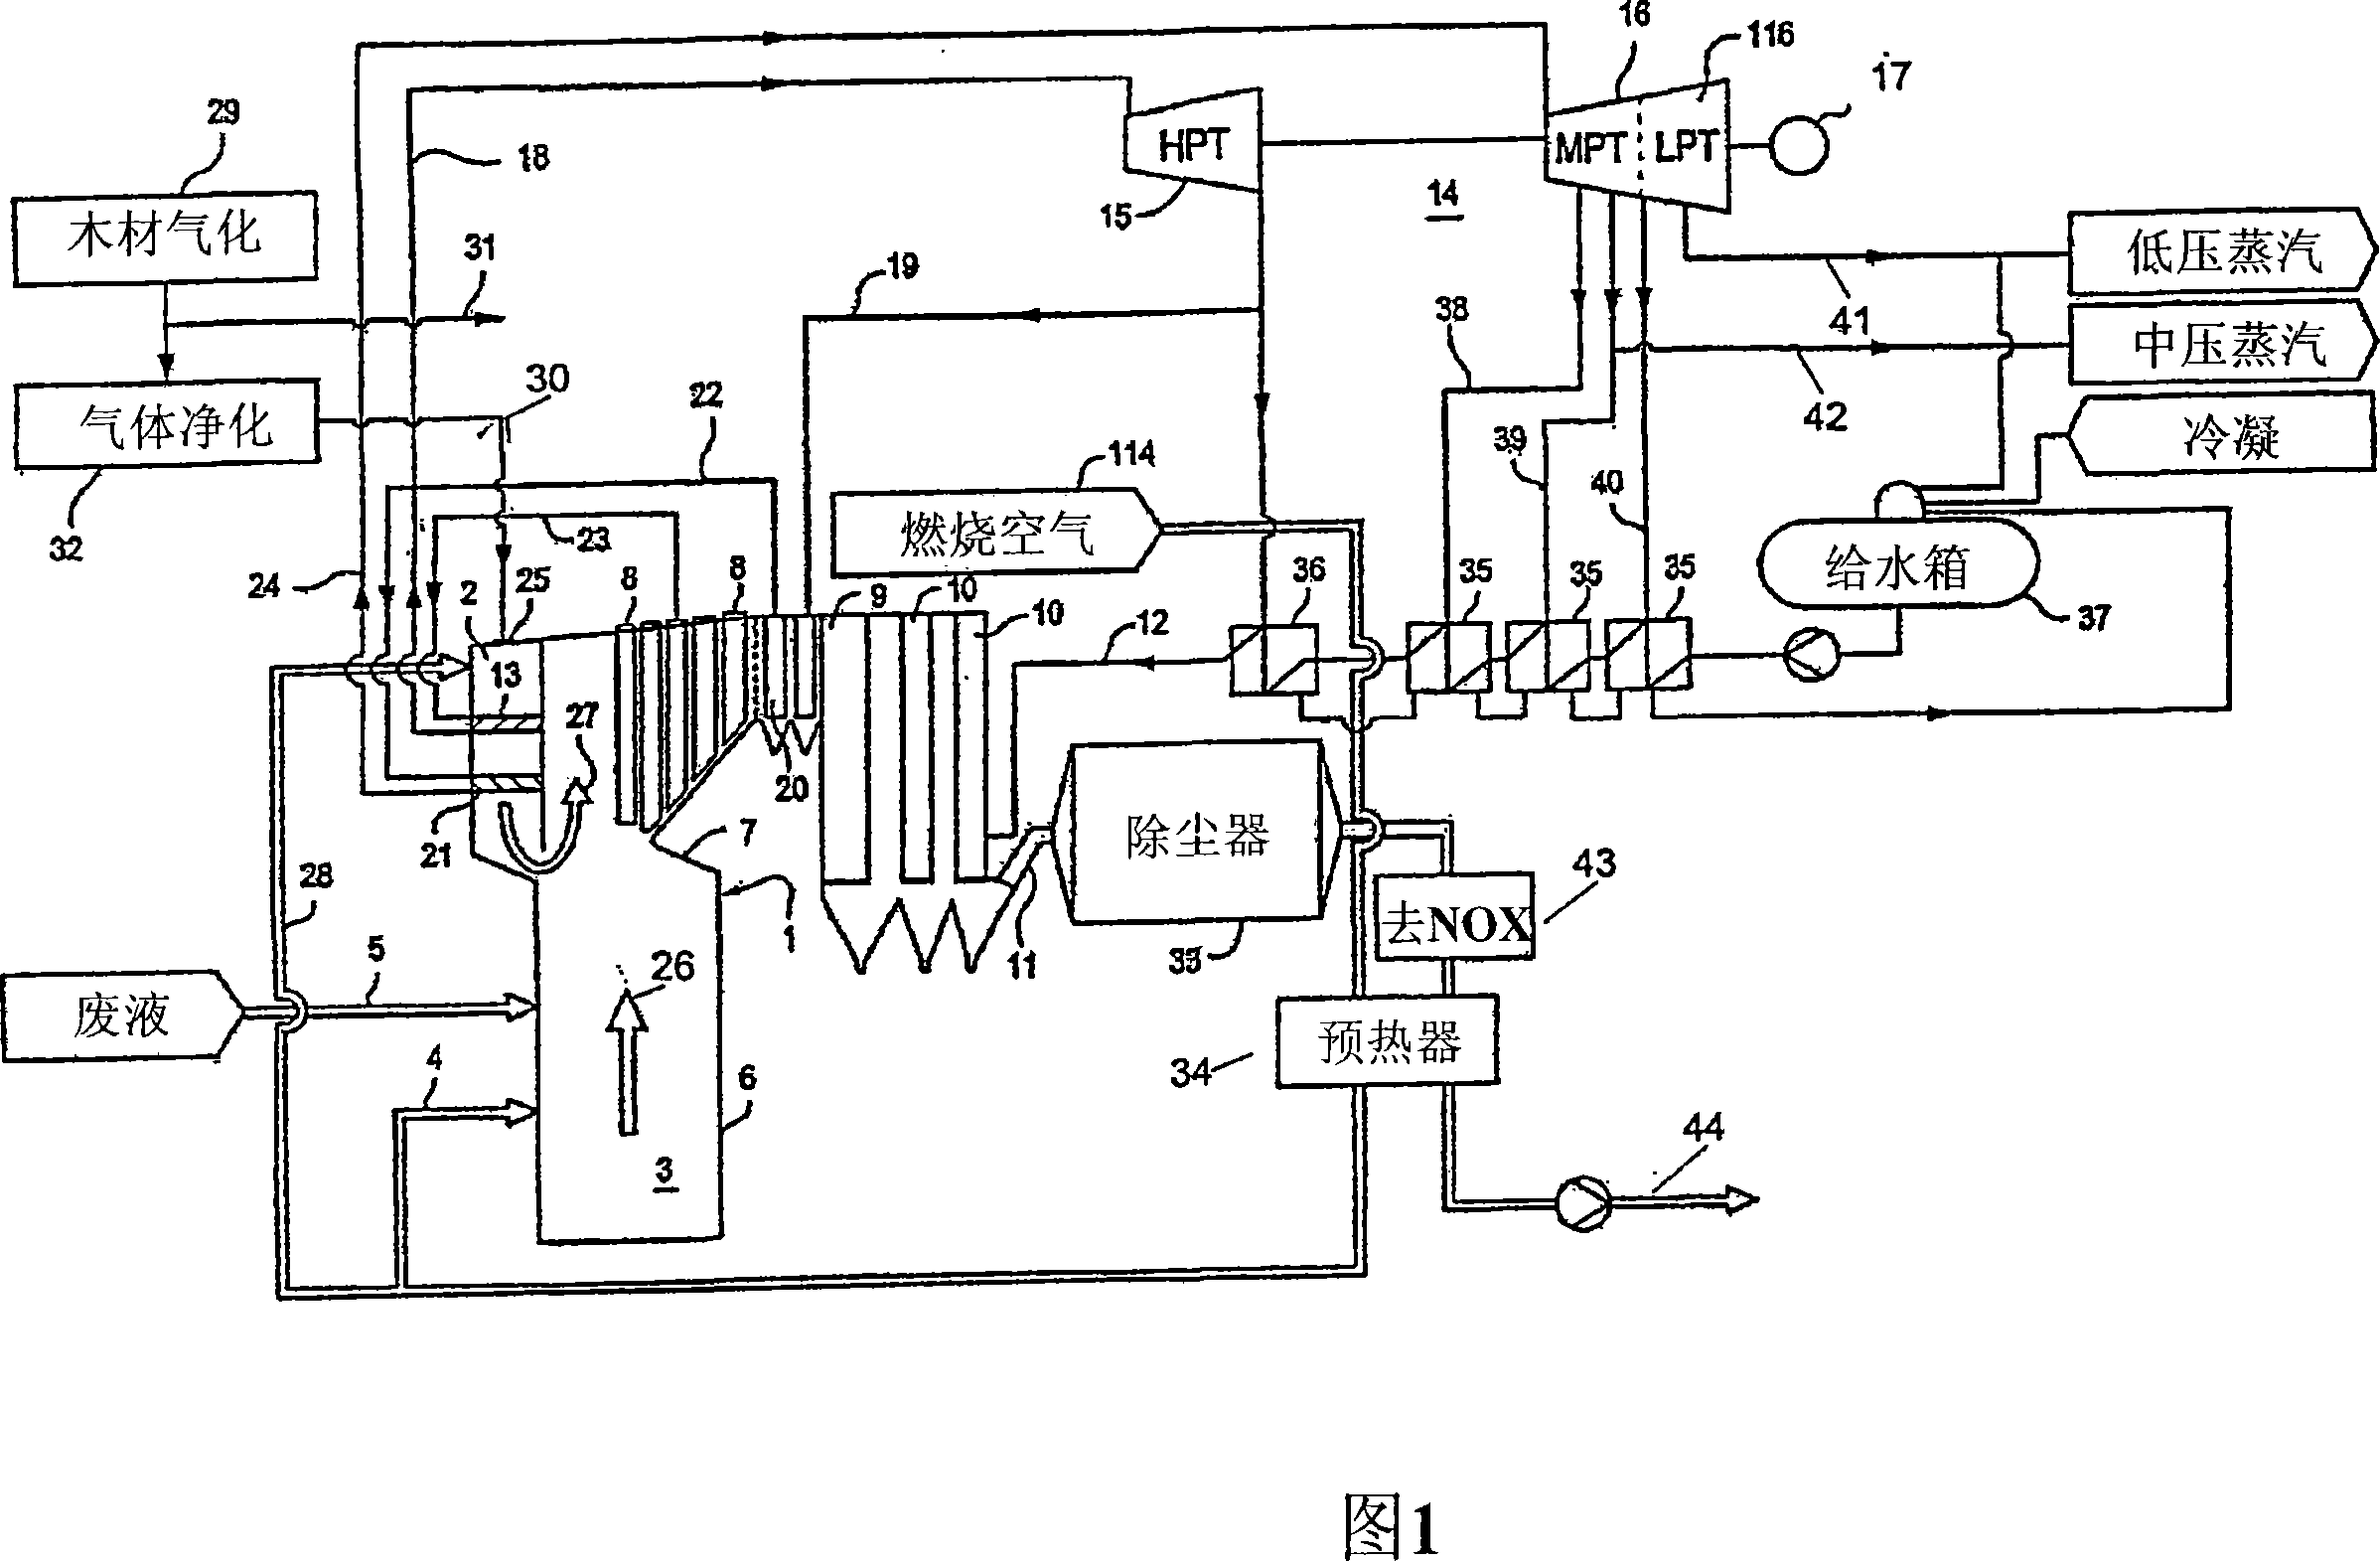 Apparatus and method for producing energy at a pulp mill